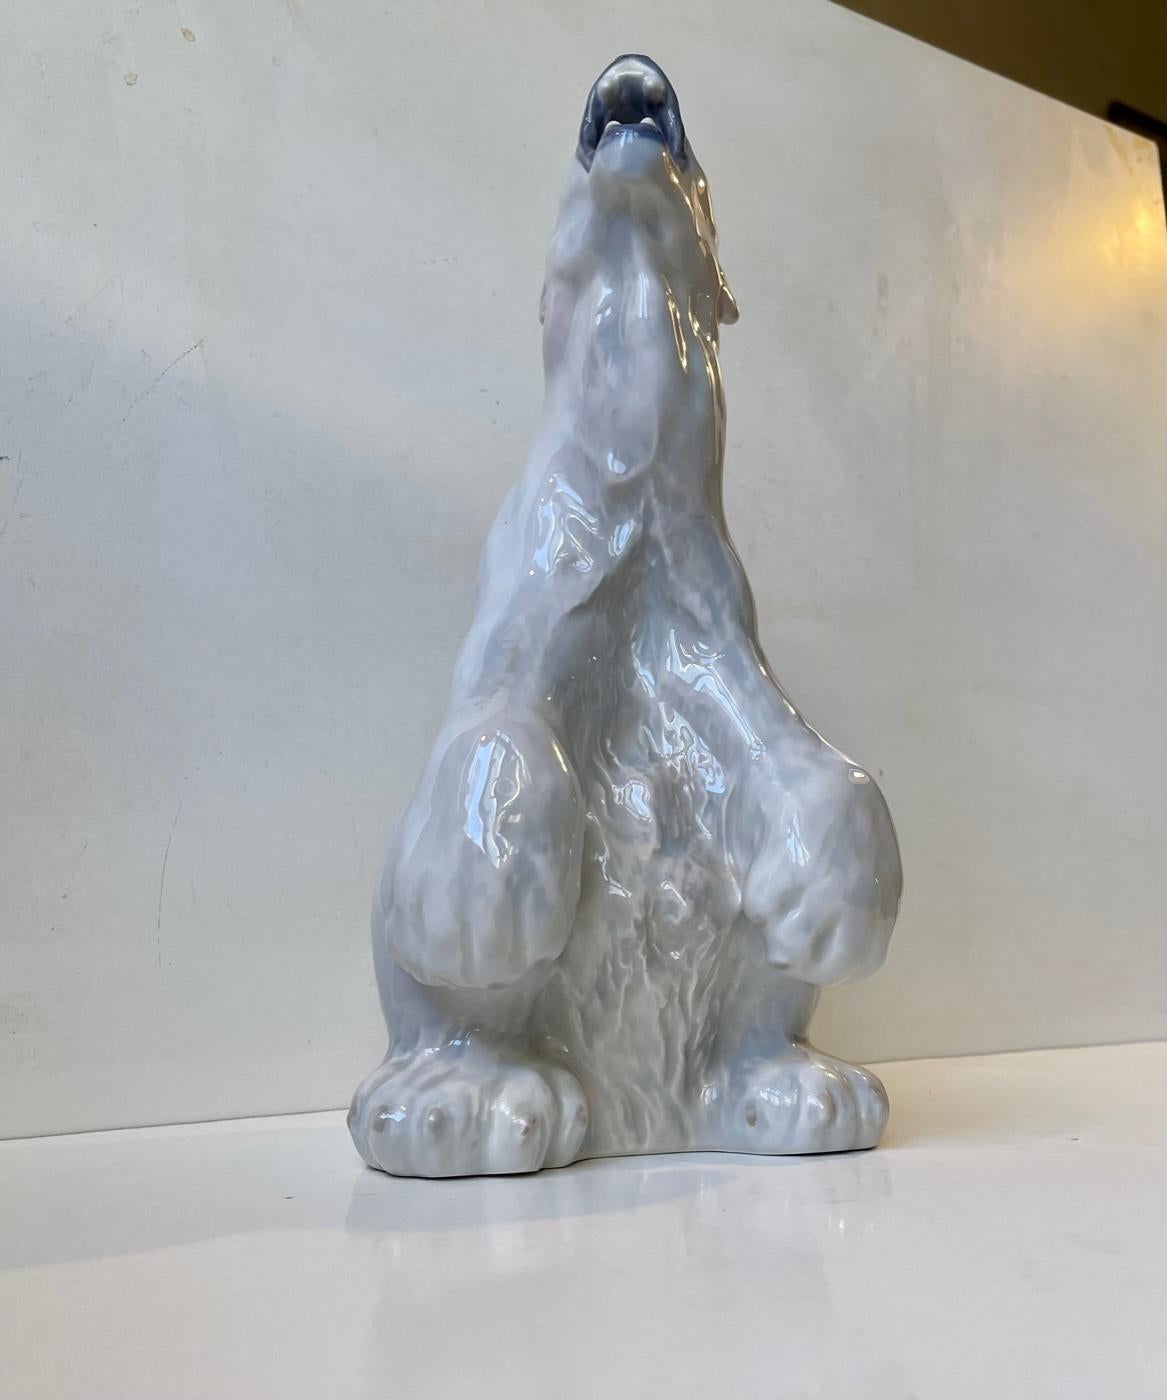 Large roaring polar bear figurine/sculpture in porcelain.  Designed in 1901 by Carl Frederik Liisberg for Royal Copenhagen. This example dates to the 1960s. Model no. 502. Measures: Height 32 cm / 12.3